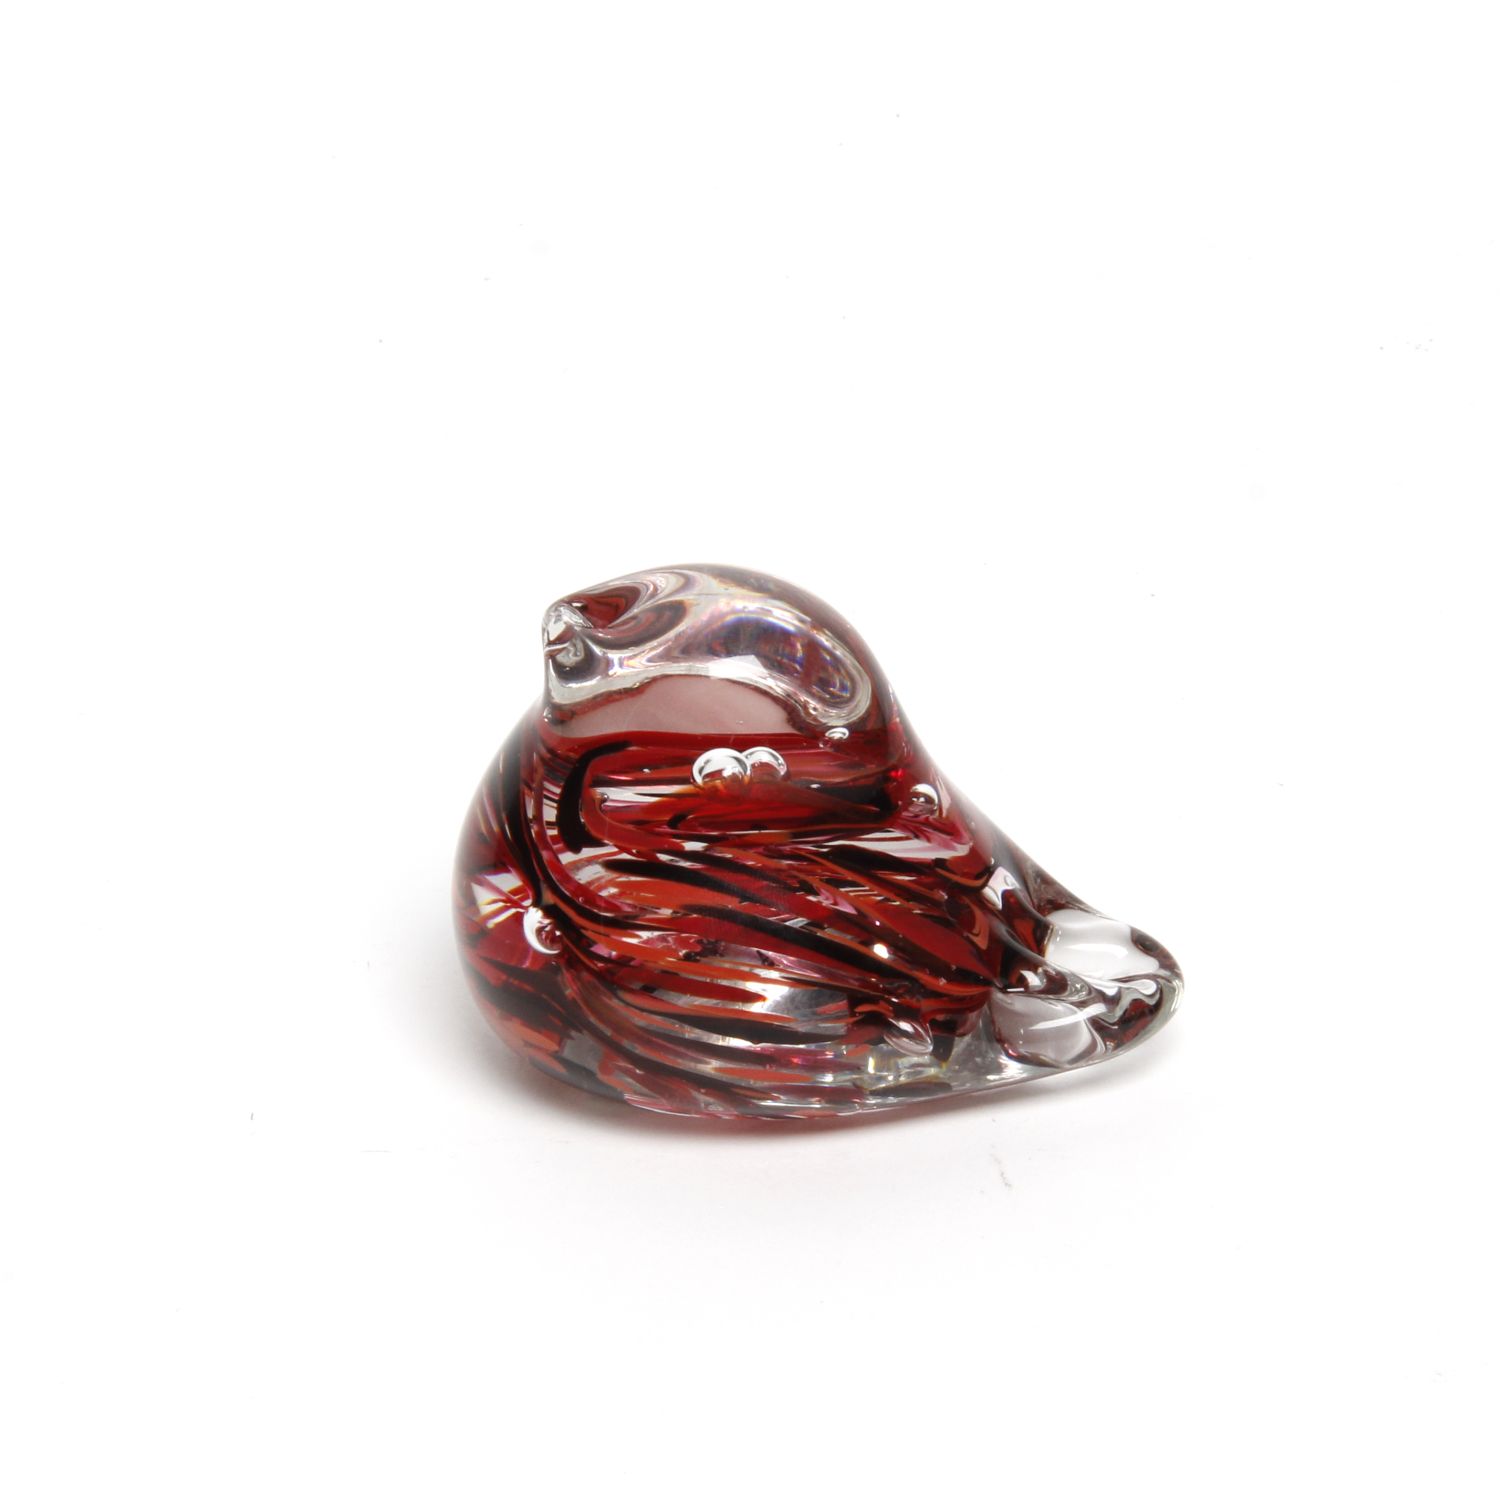 Victoria Guy: Swirled Bird in Red Product Image 3 of 5